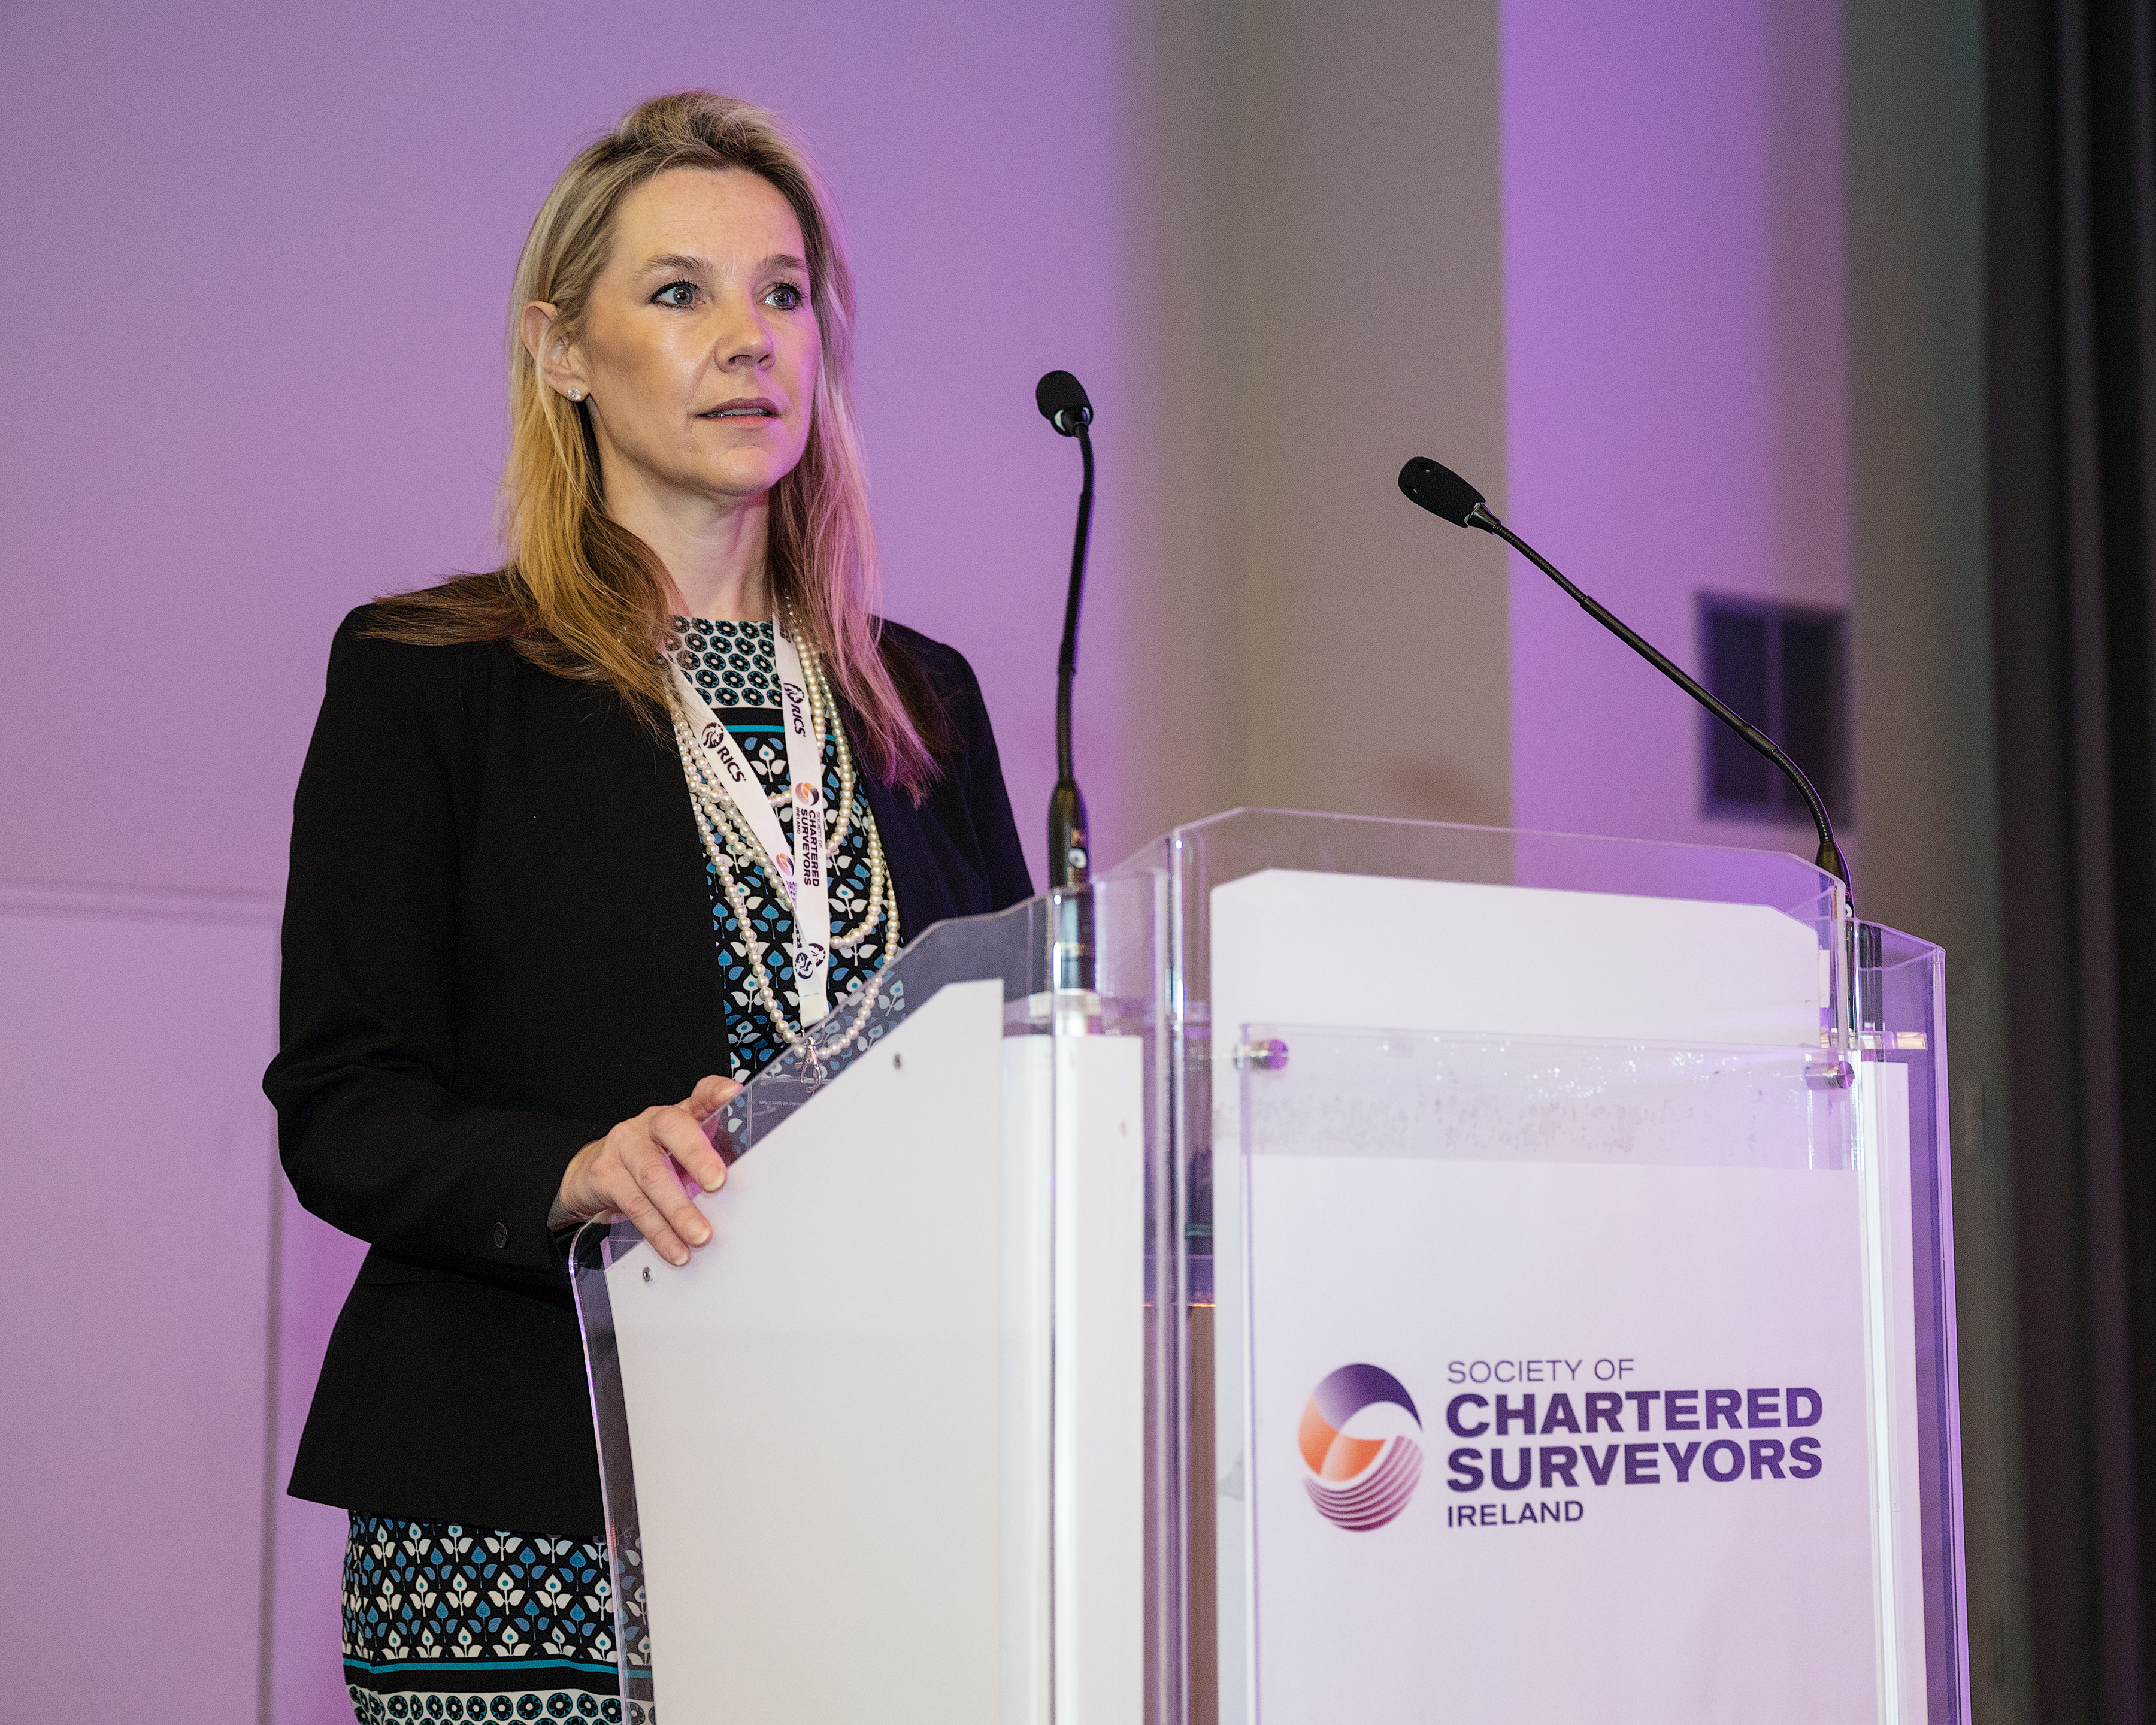 ClarityVP were delighted to be asked to address the Society of Chartered Surveyors Ireland